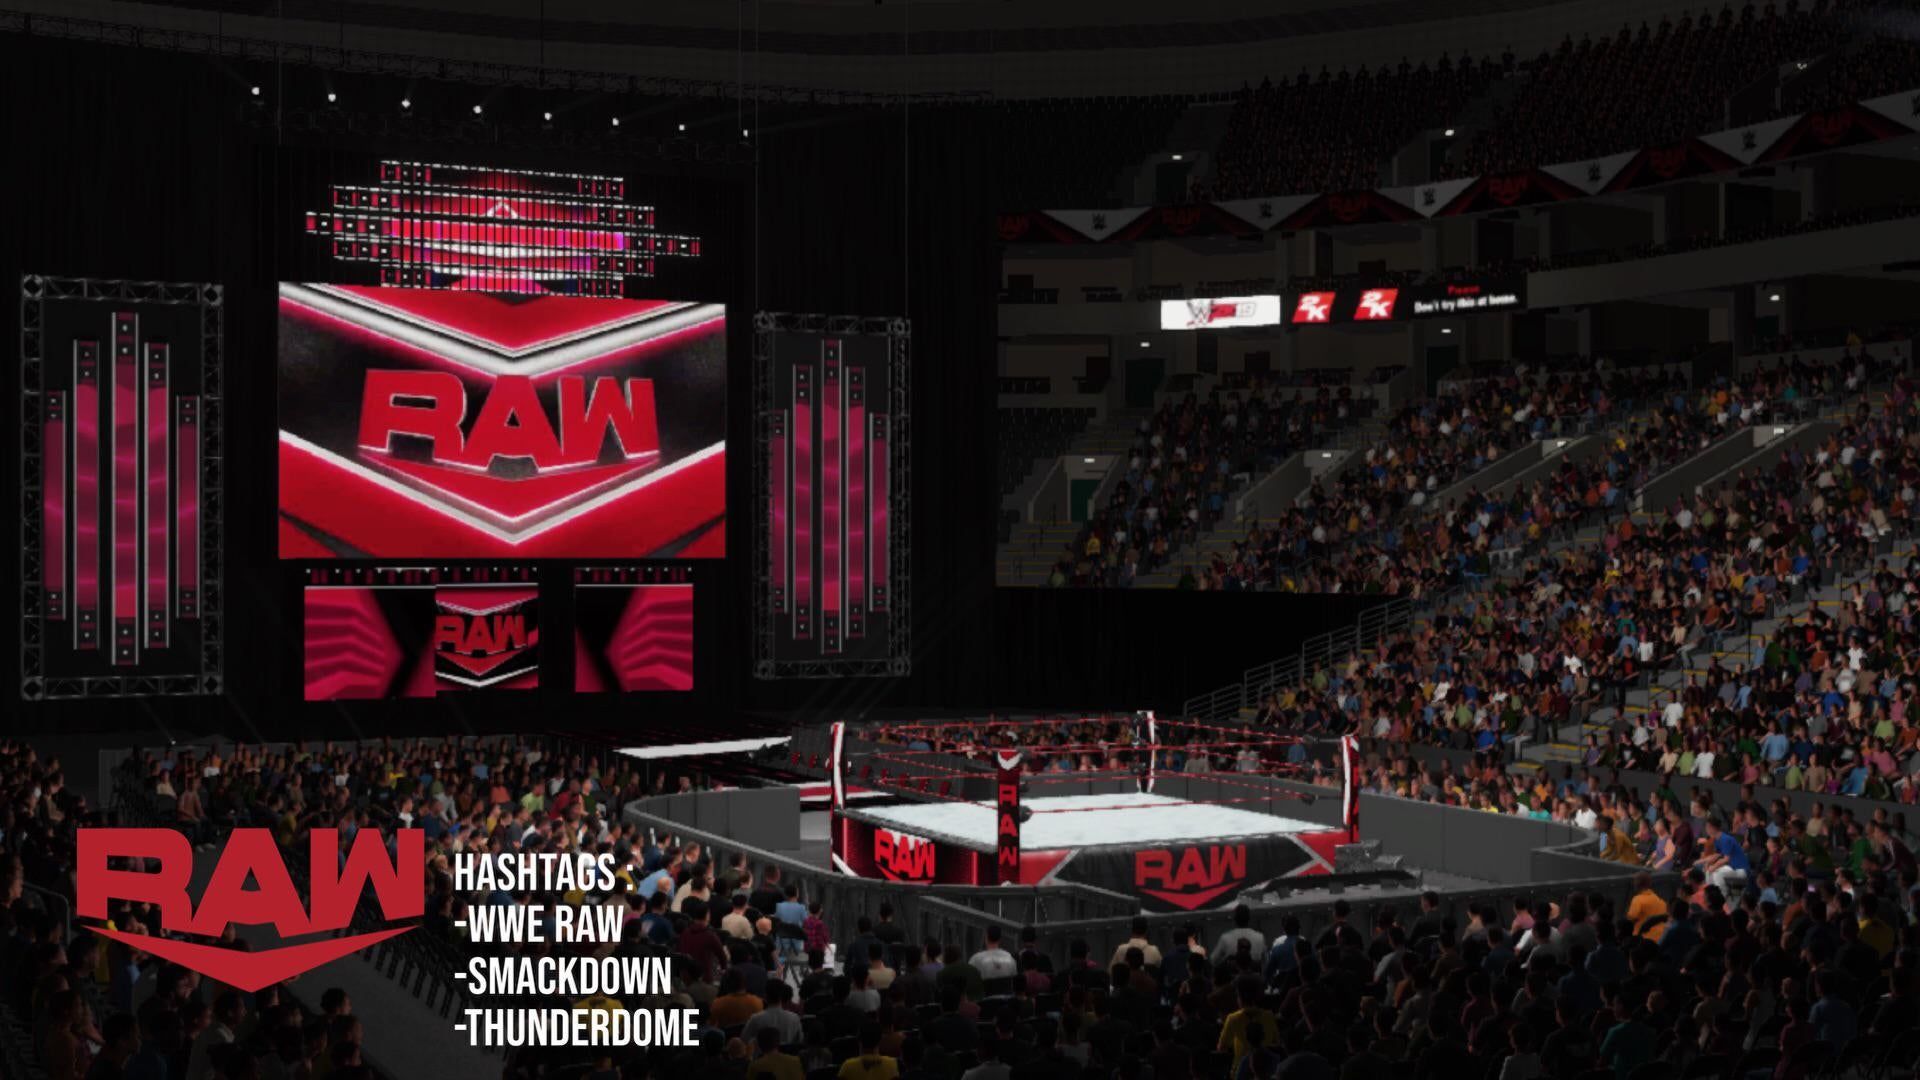 Xbox 1 WWE 2k19) Updated Raw And Smackdown Thunderdome Arenas Credit To U Th_shark_club For Logos